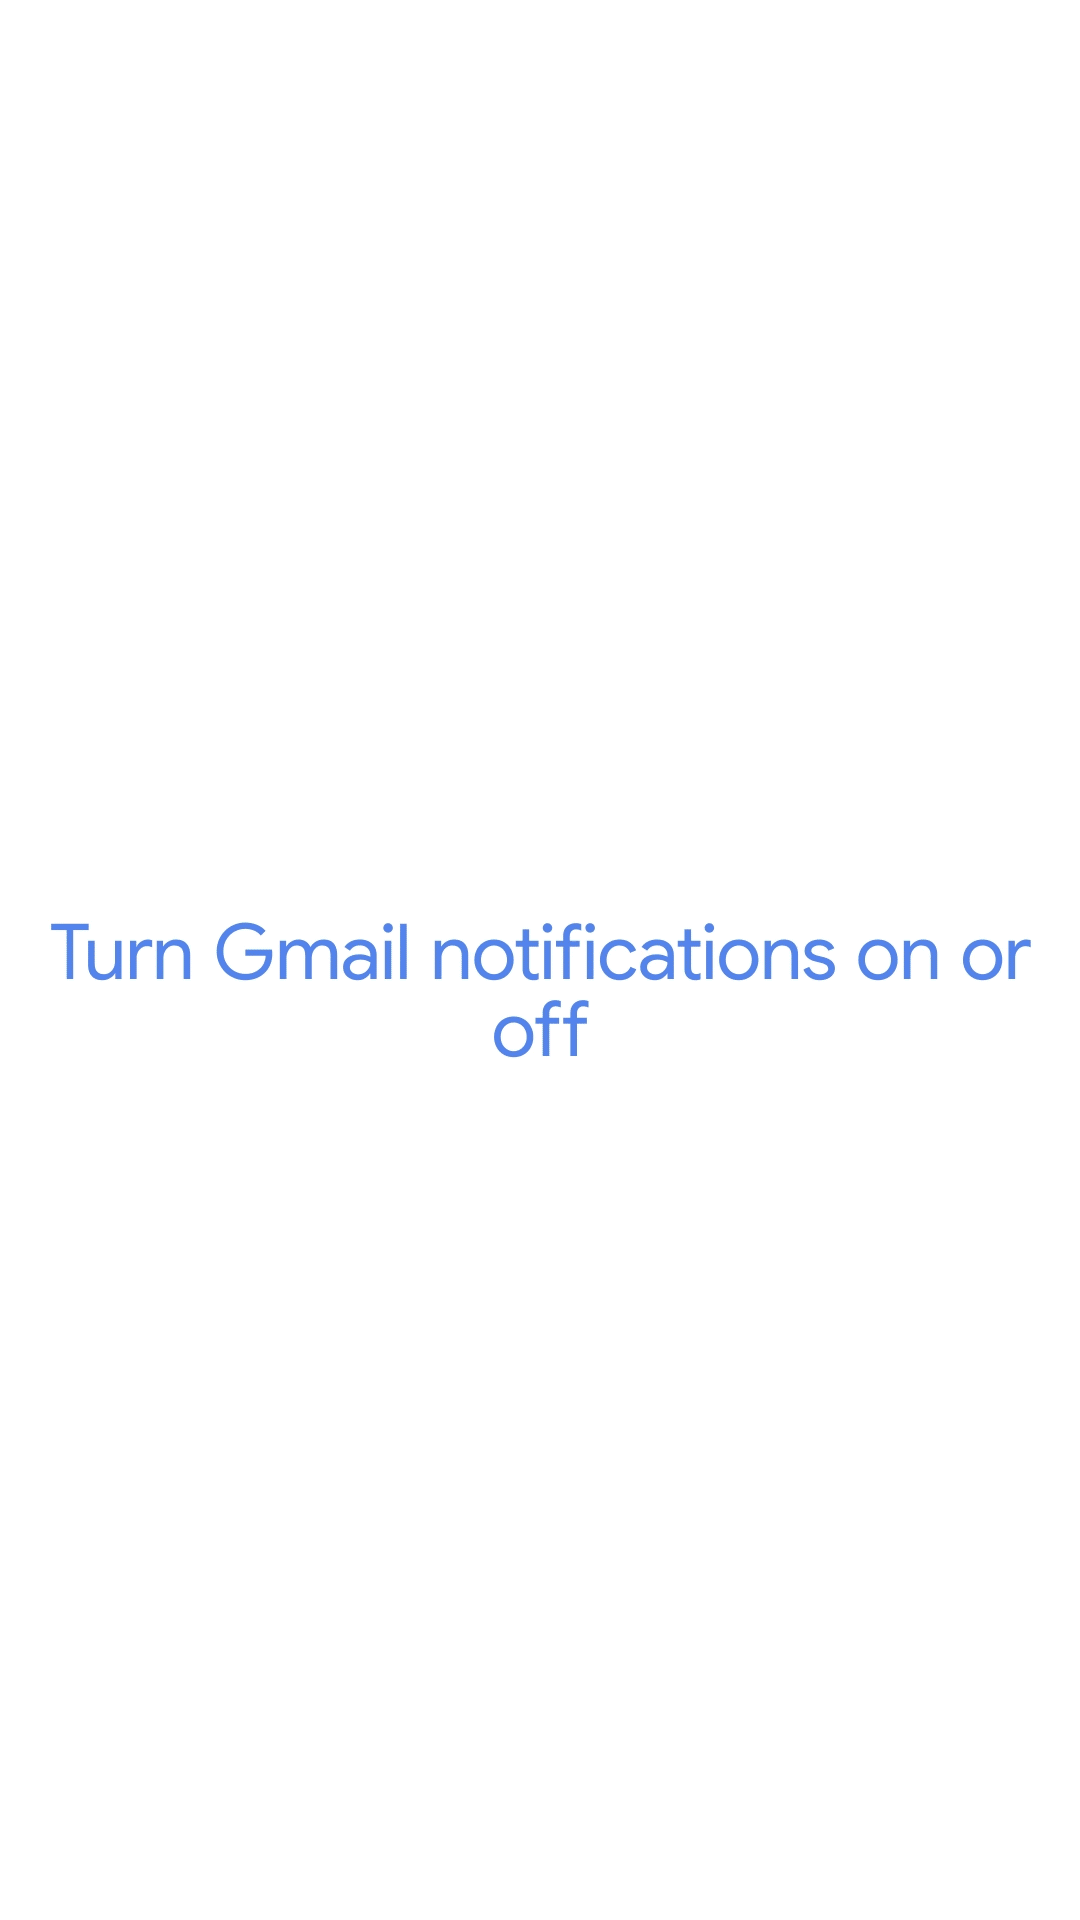 An animation showing how to turn Gmail notifications on or off on Android